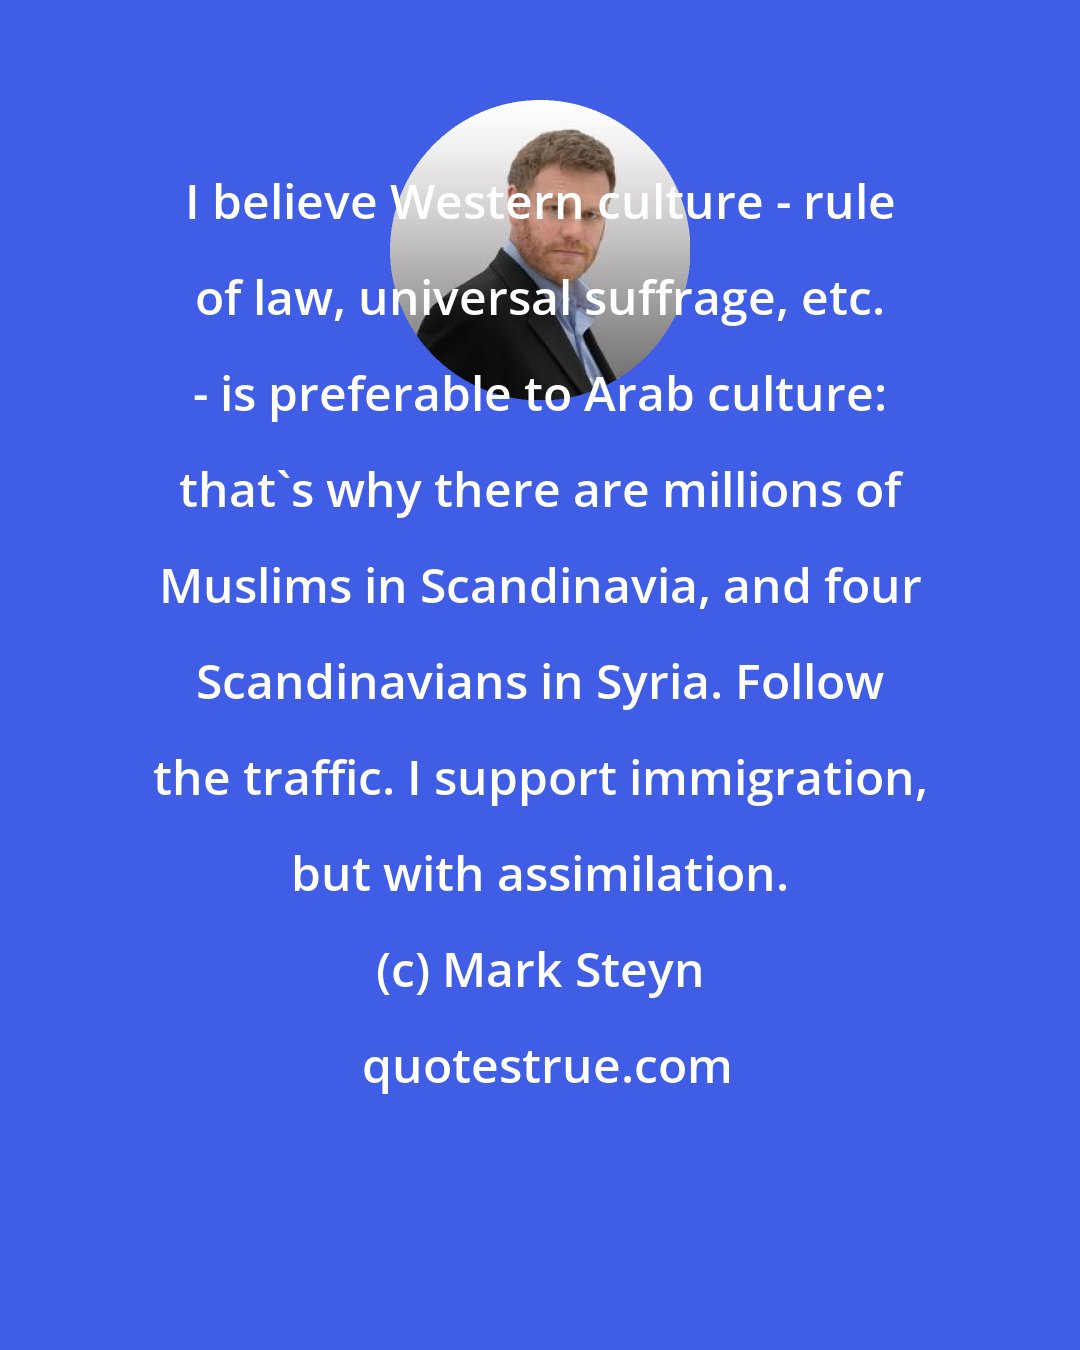 Mark Steyn: I believe Western culture - rule of law, universal suffrage, etc. - is preferable to Arab culture: that's why there are millions of Muslims in Scandinavia, and four Scandinavians in Syria. Follow the traffic. I support immigration, but with assimilation.